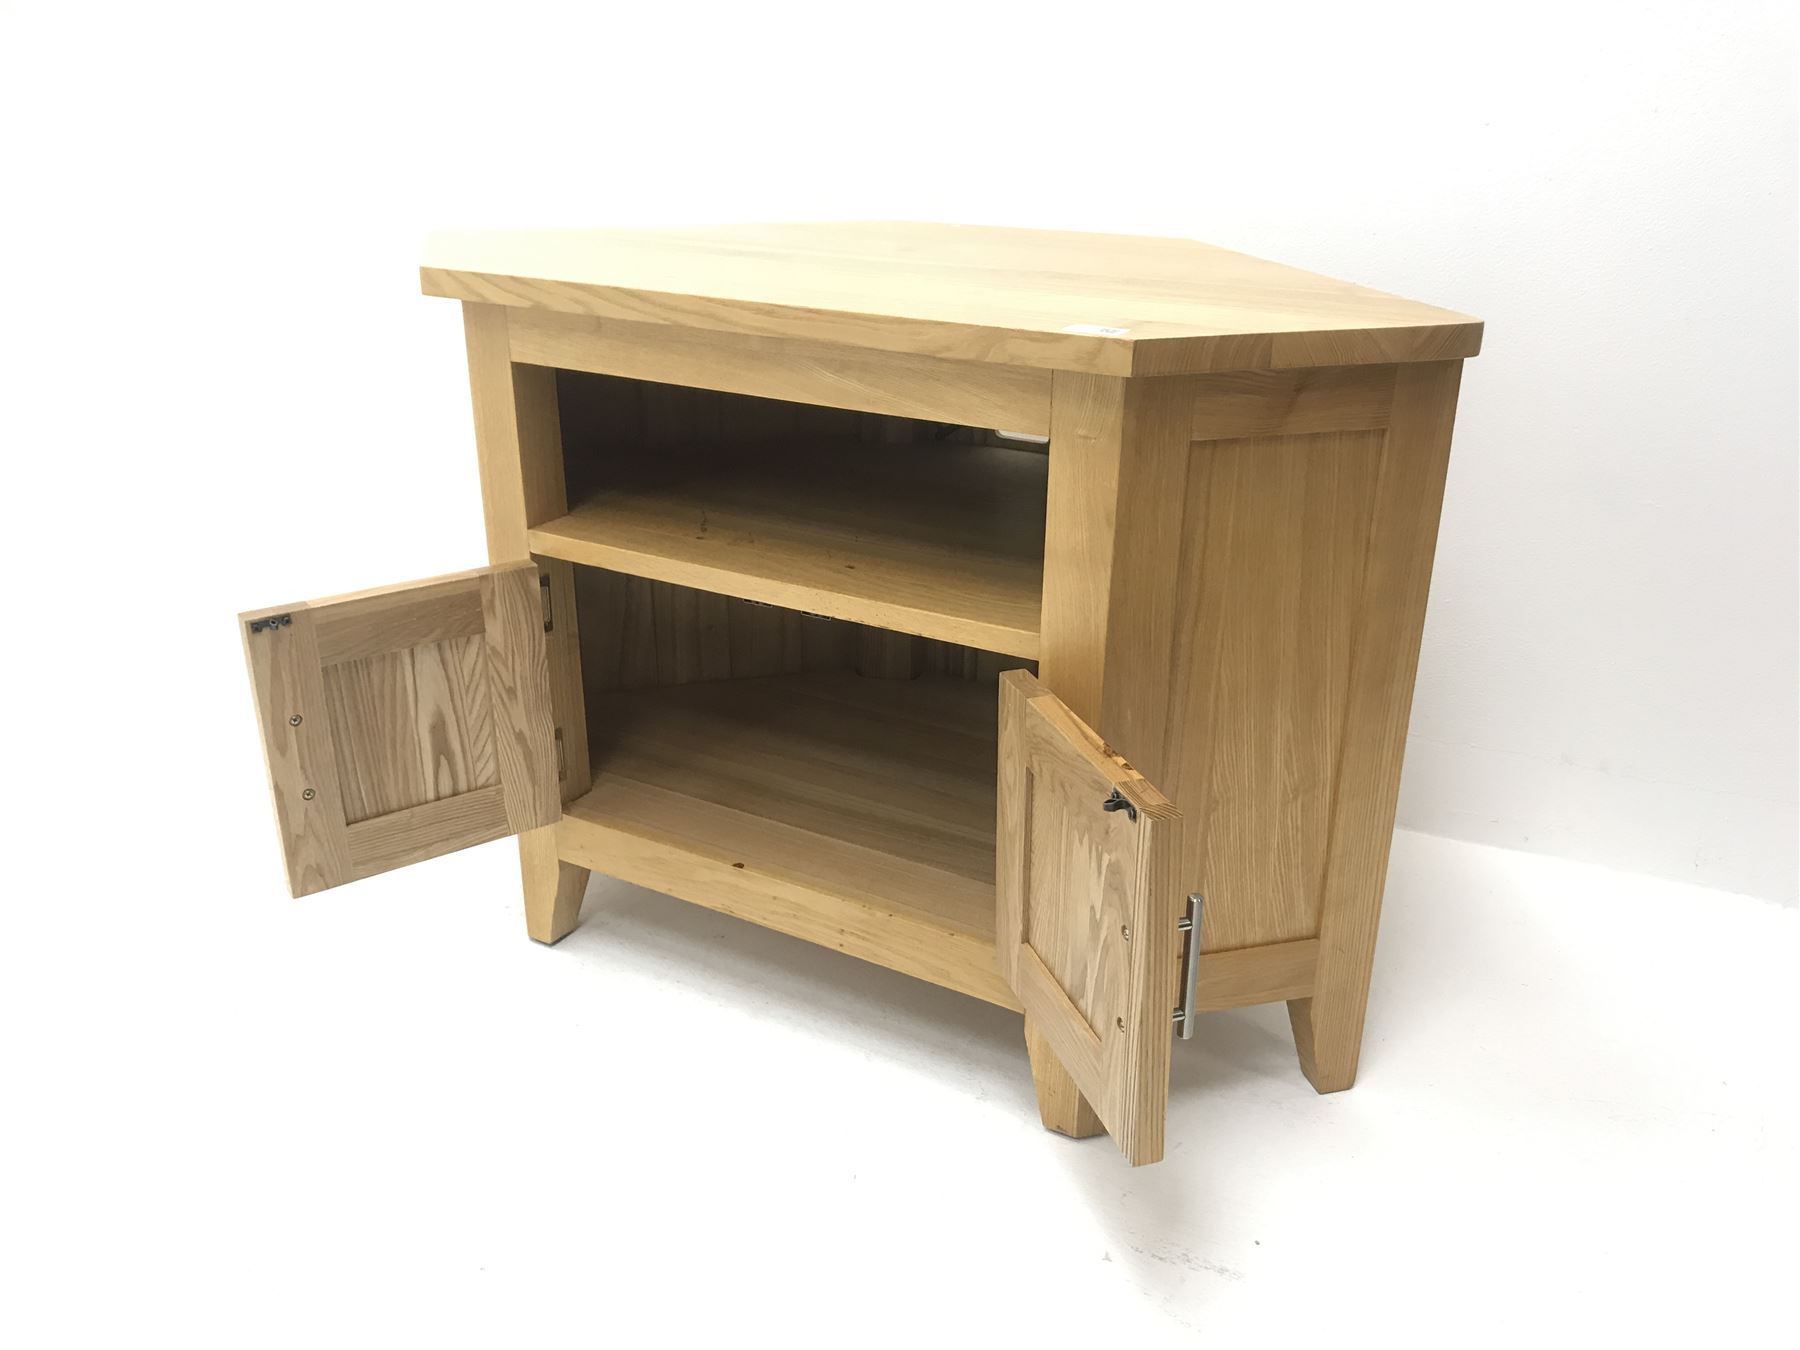 Light oak corner television stand, single shelf above two cupboard doors, stile supports - Image 3 of 3